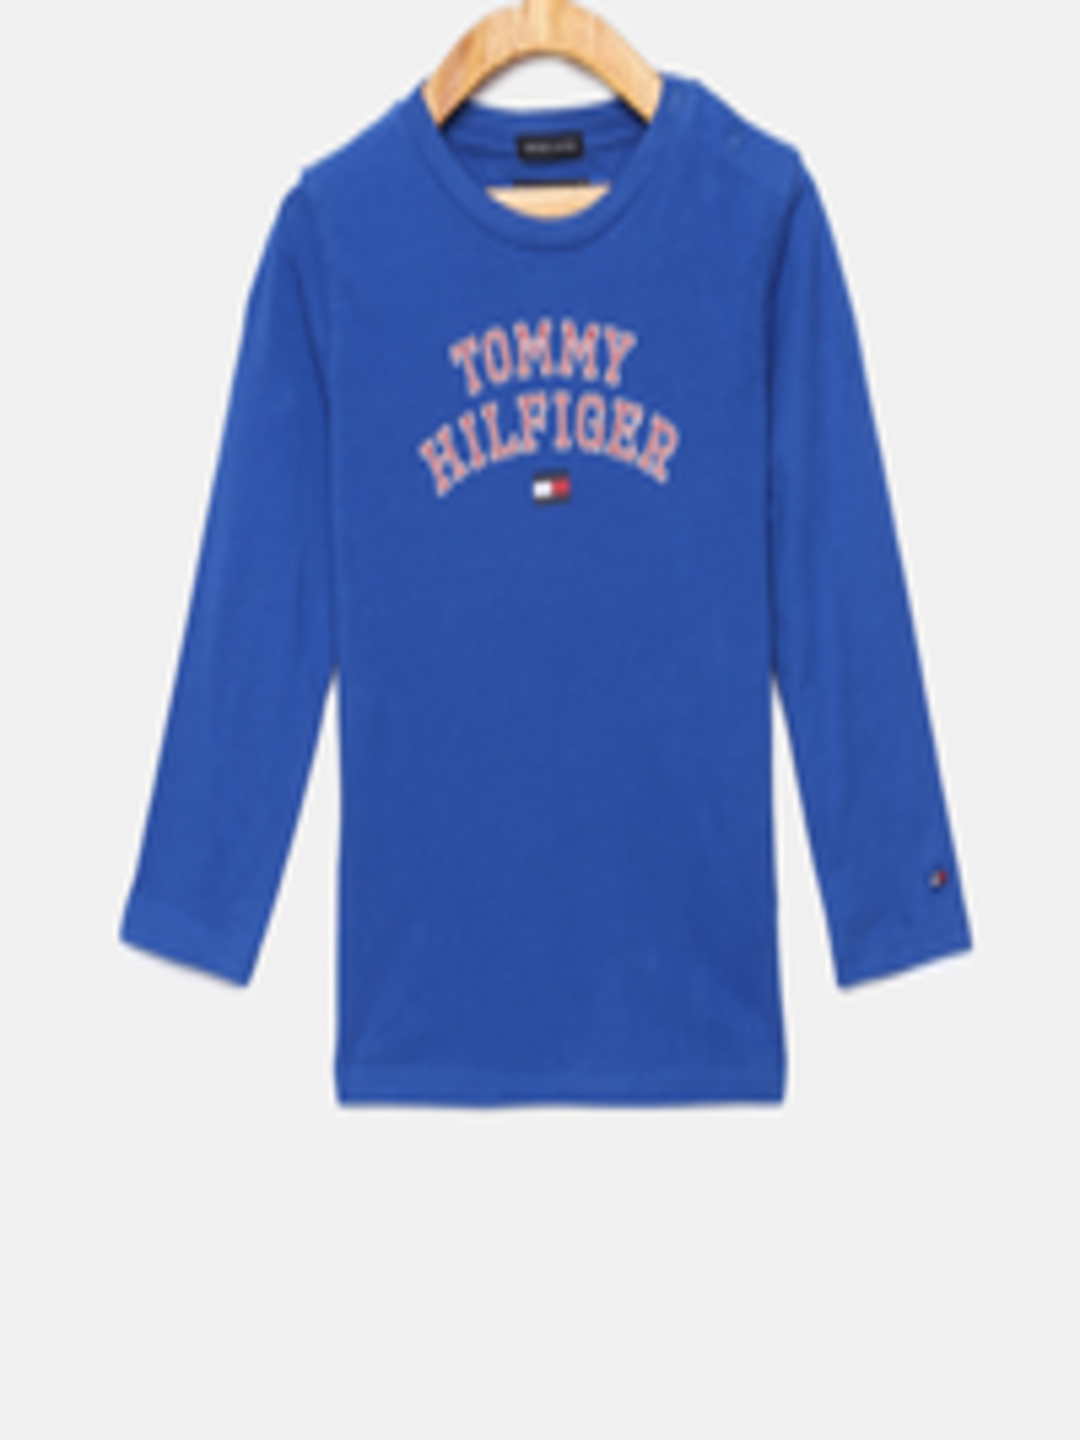 Buy Tommy Hilfiger Boys Blue Printed Round Neck T Shirt - Tshirts for ...